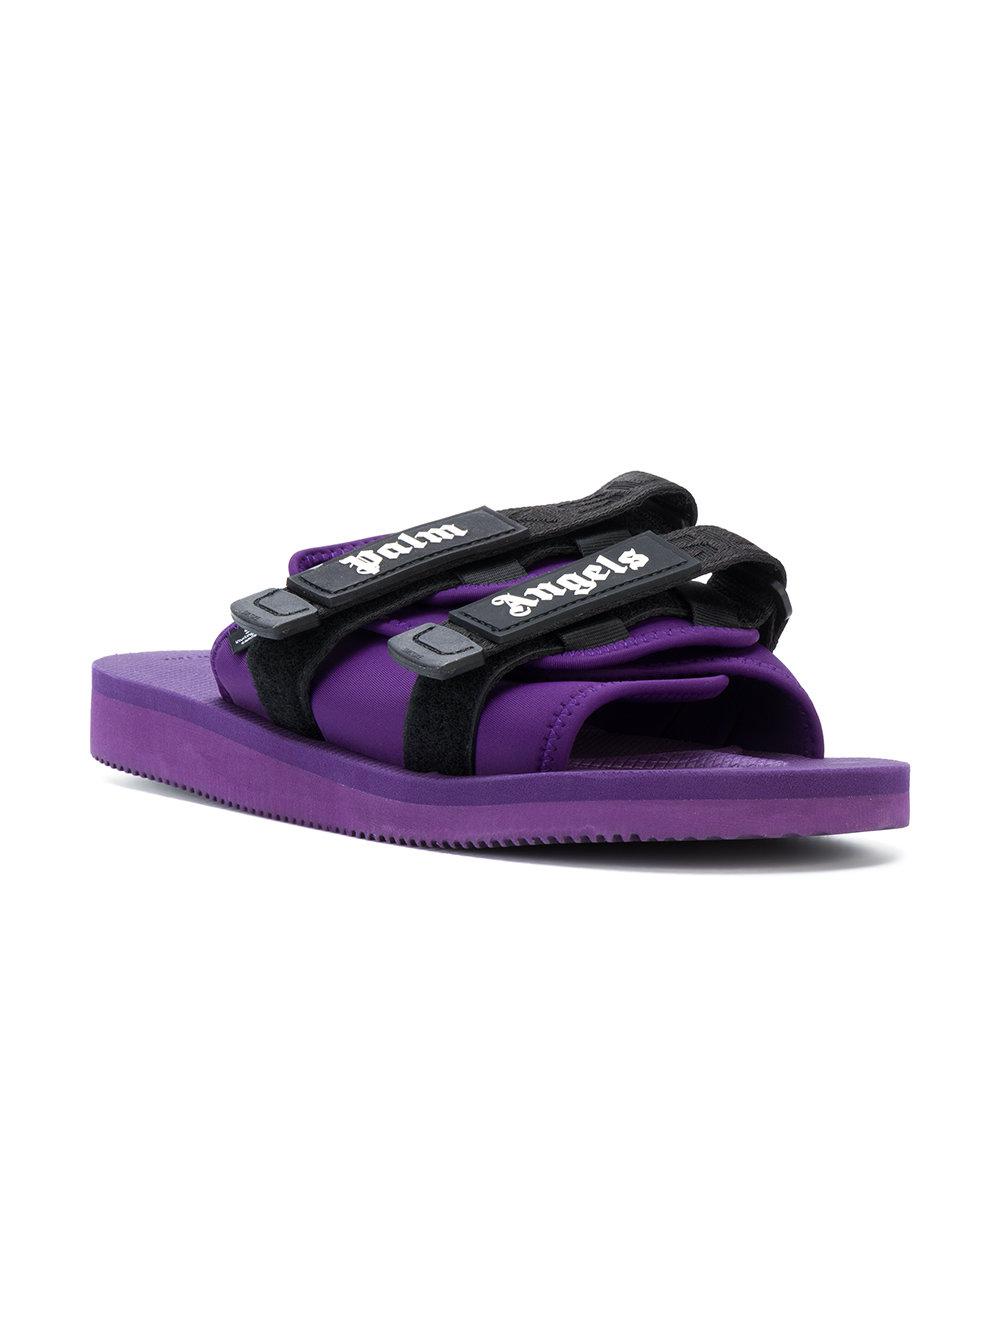 Buy > palm angels double strap slides > in stock